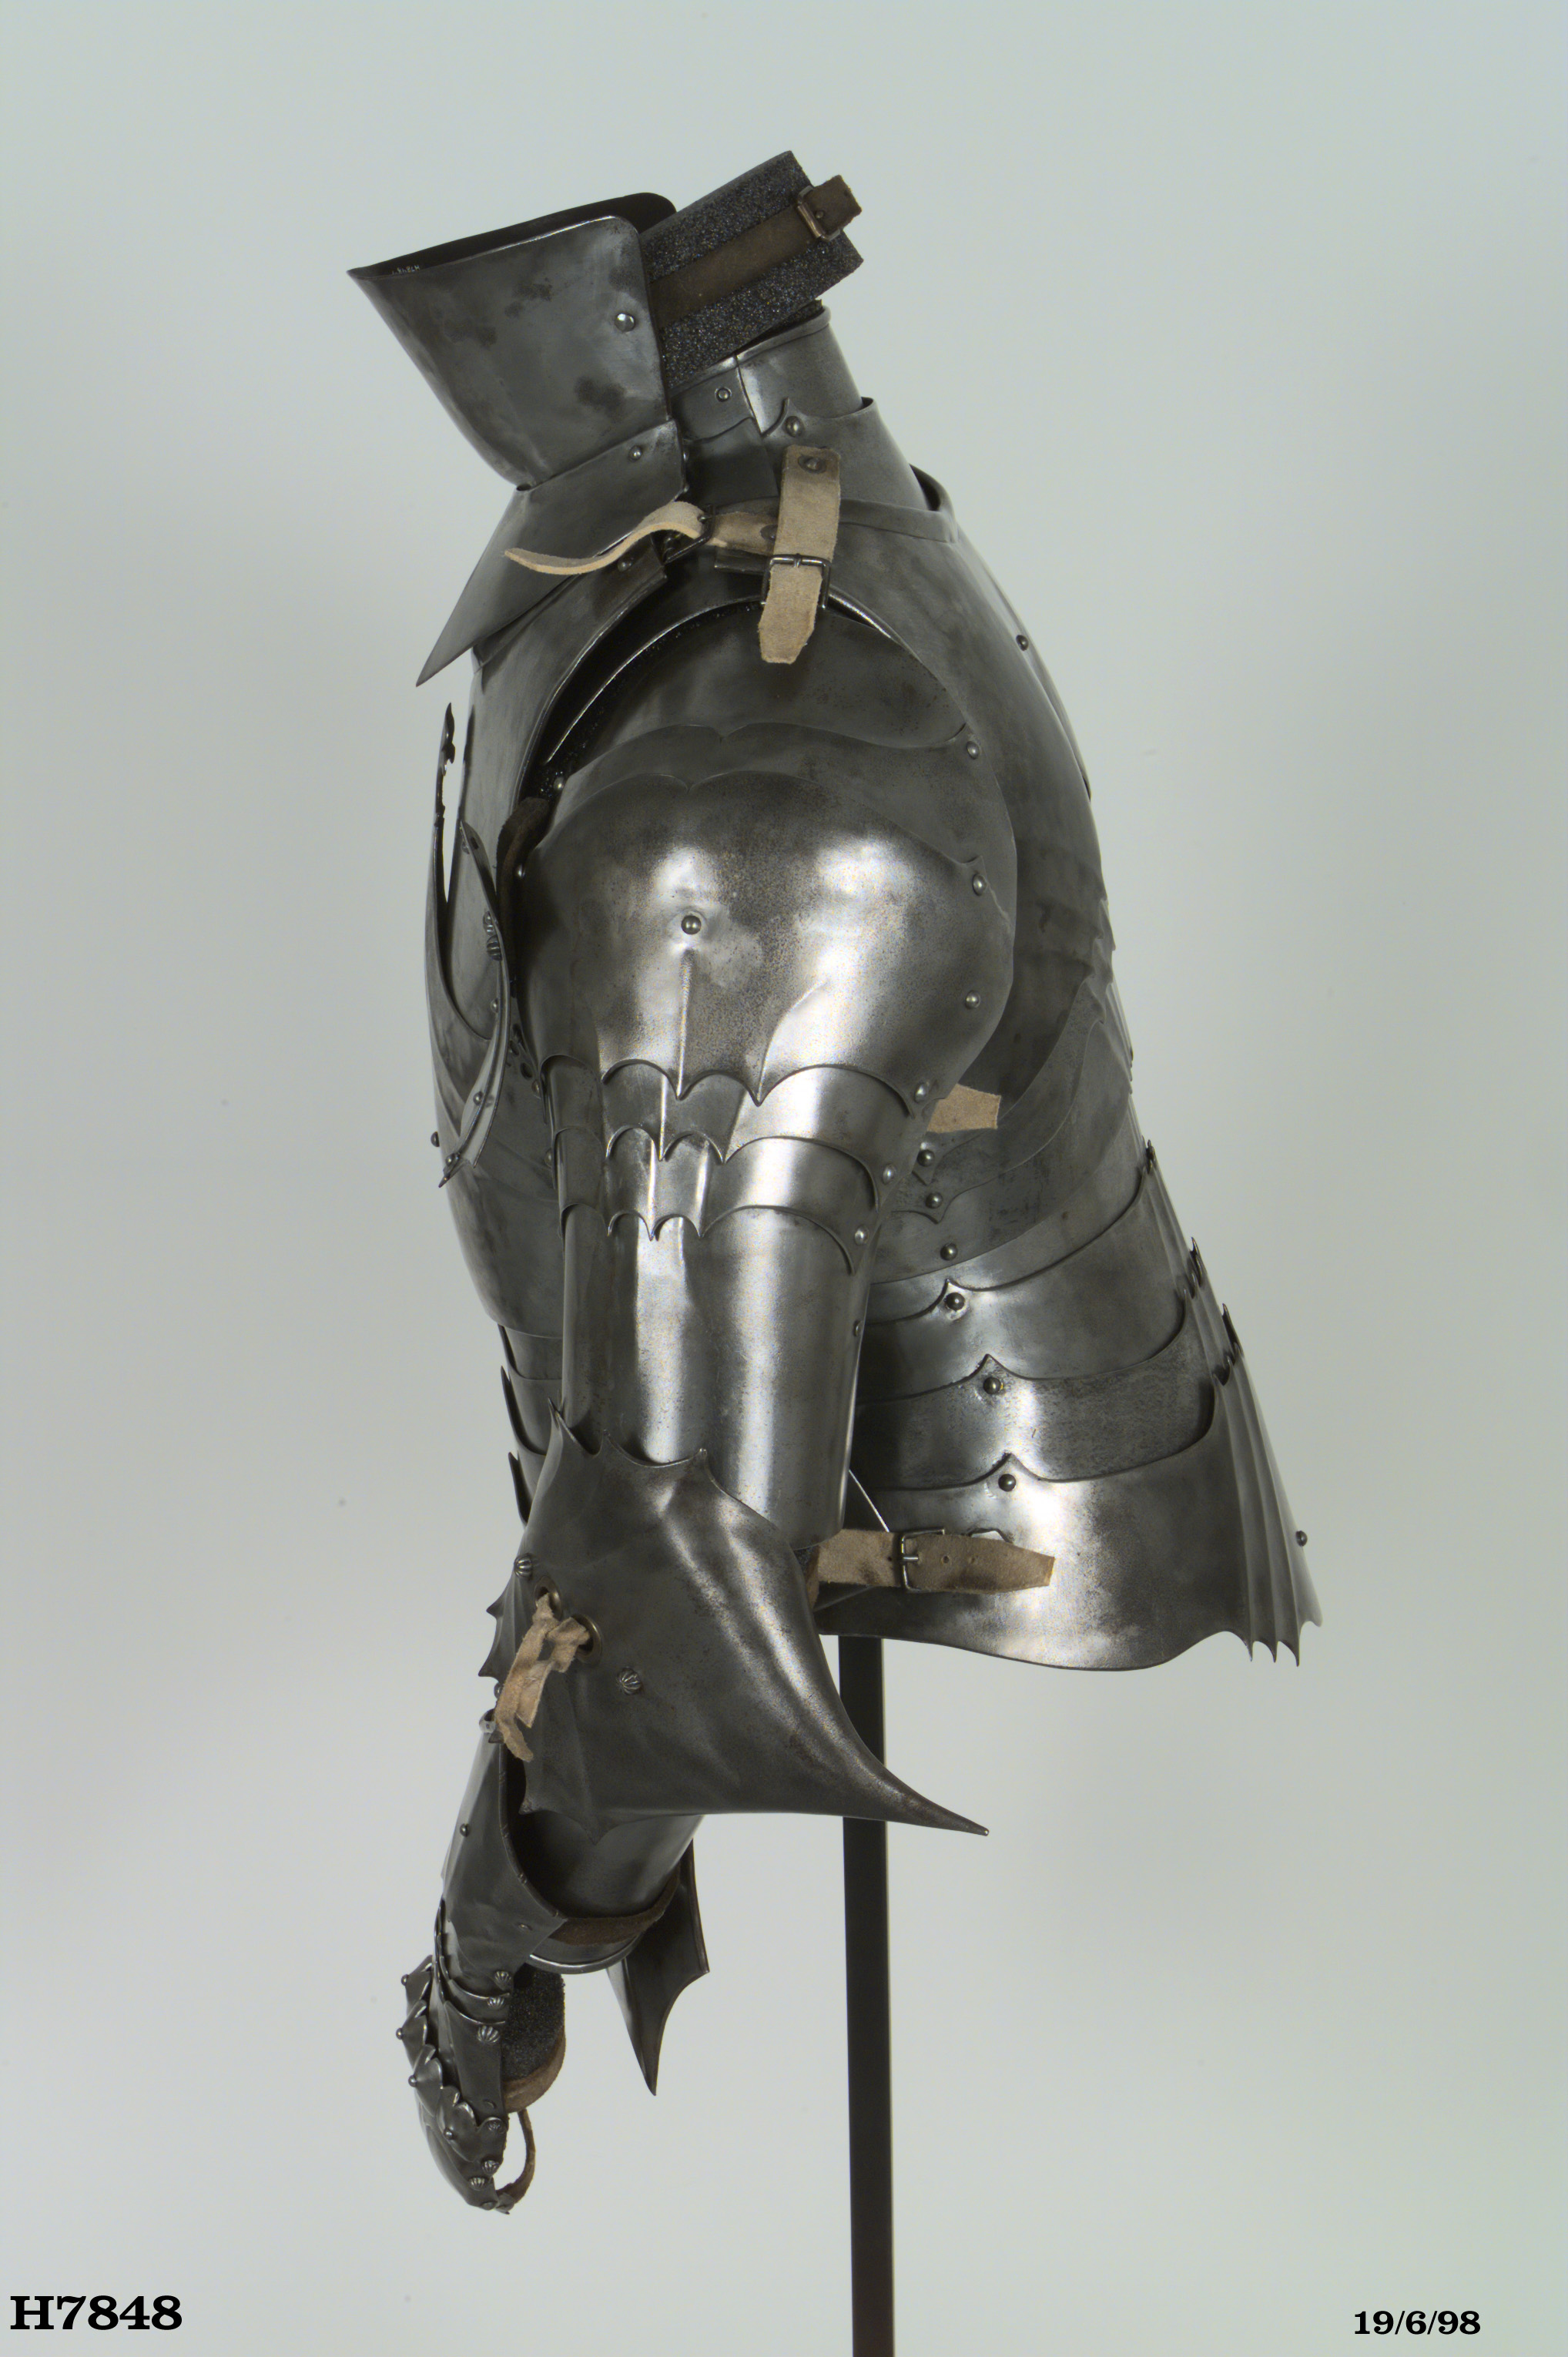 Reproduction half suit armour from 15th century suit of armour